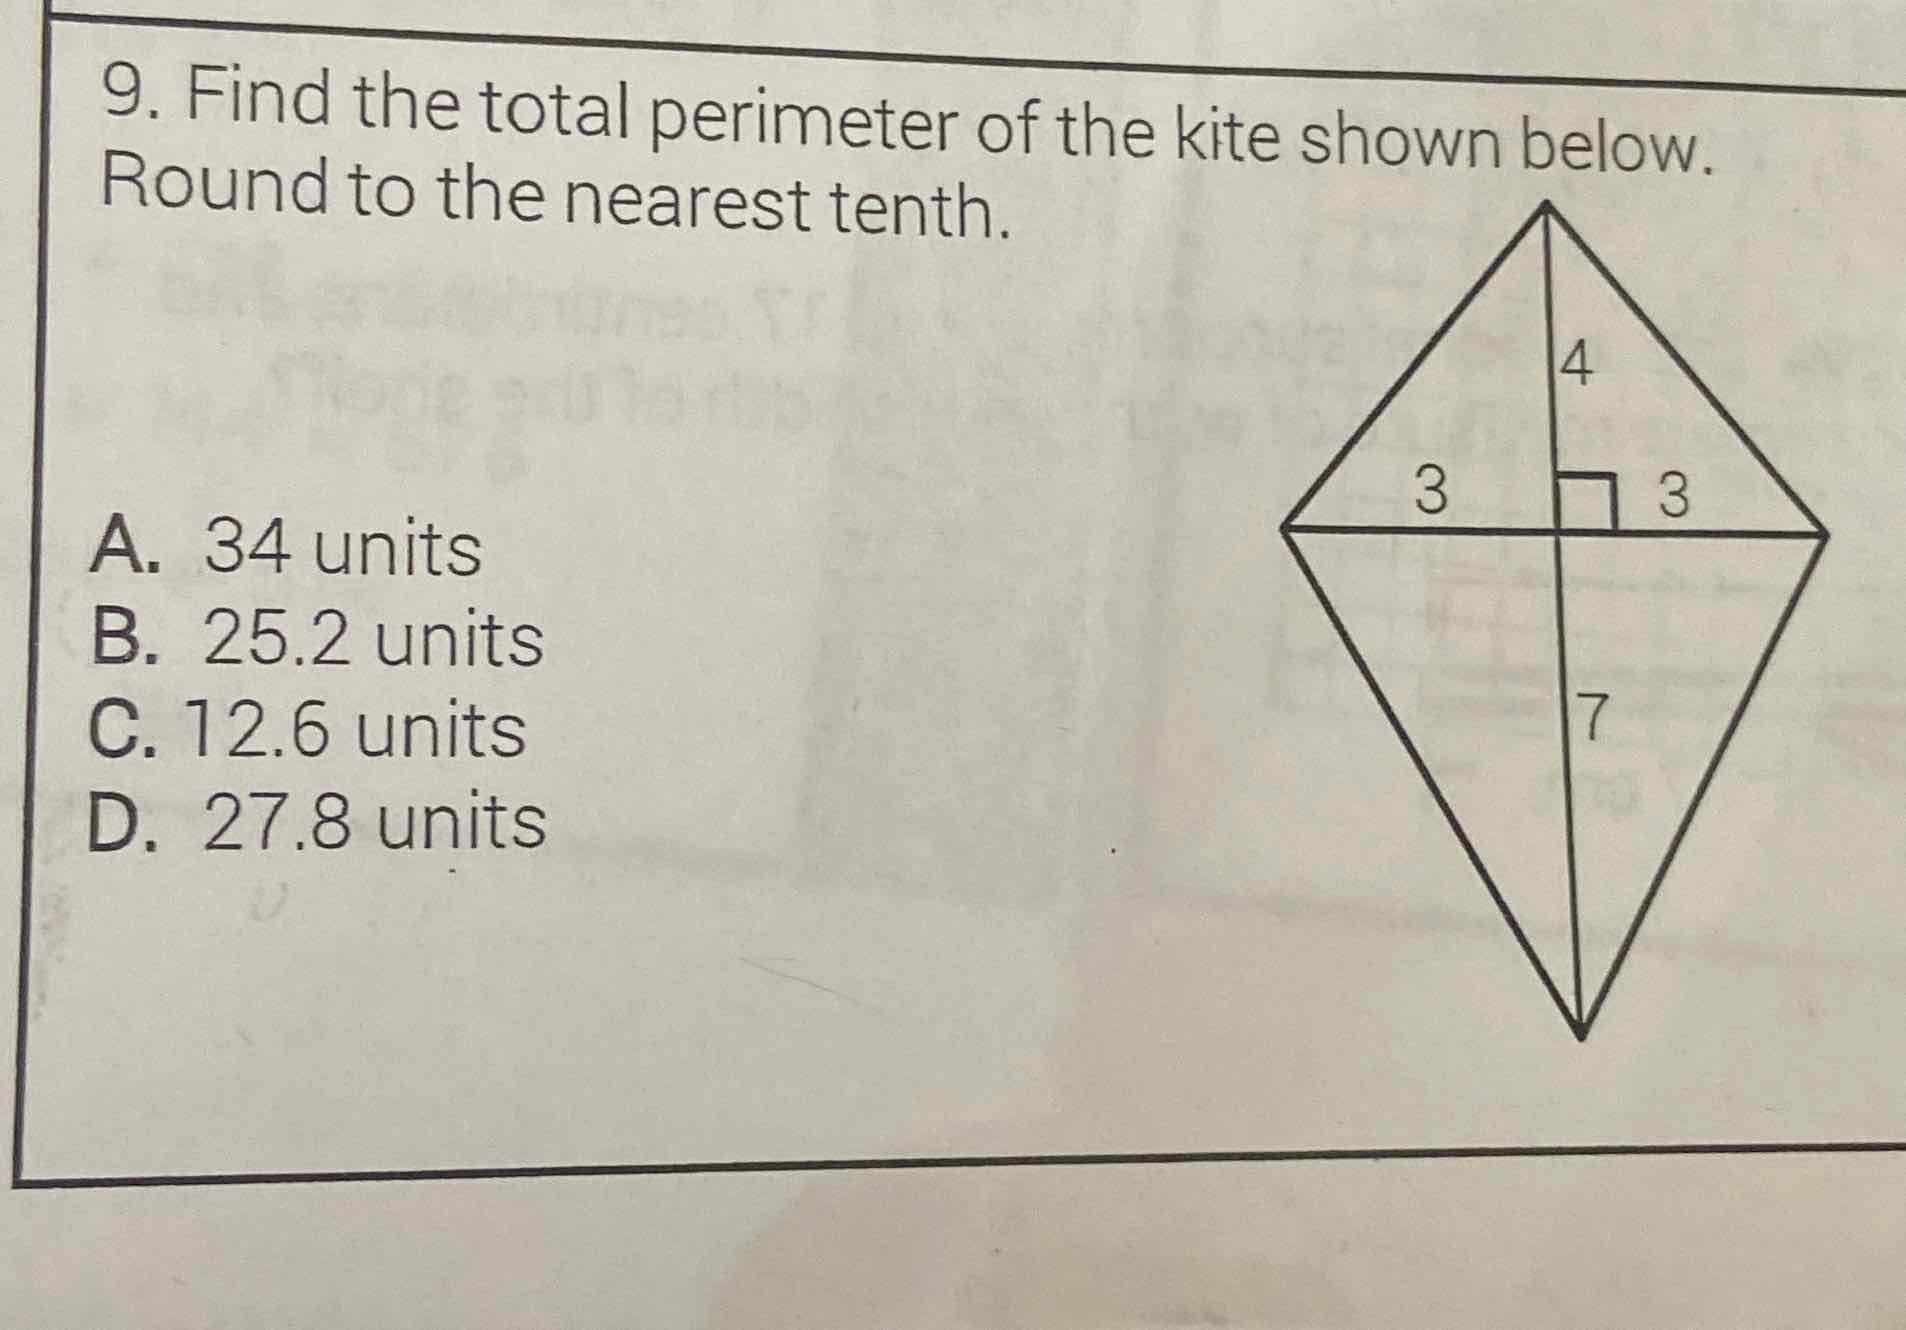 9. Find the total perimeter of the kite shown below. Round to the nearest tenth.
A. 34 units
B. \( 25.2 \) units
C. \( 12.6 \) units
D. \( 27.8 \) units